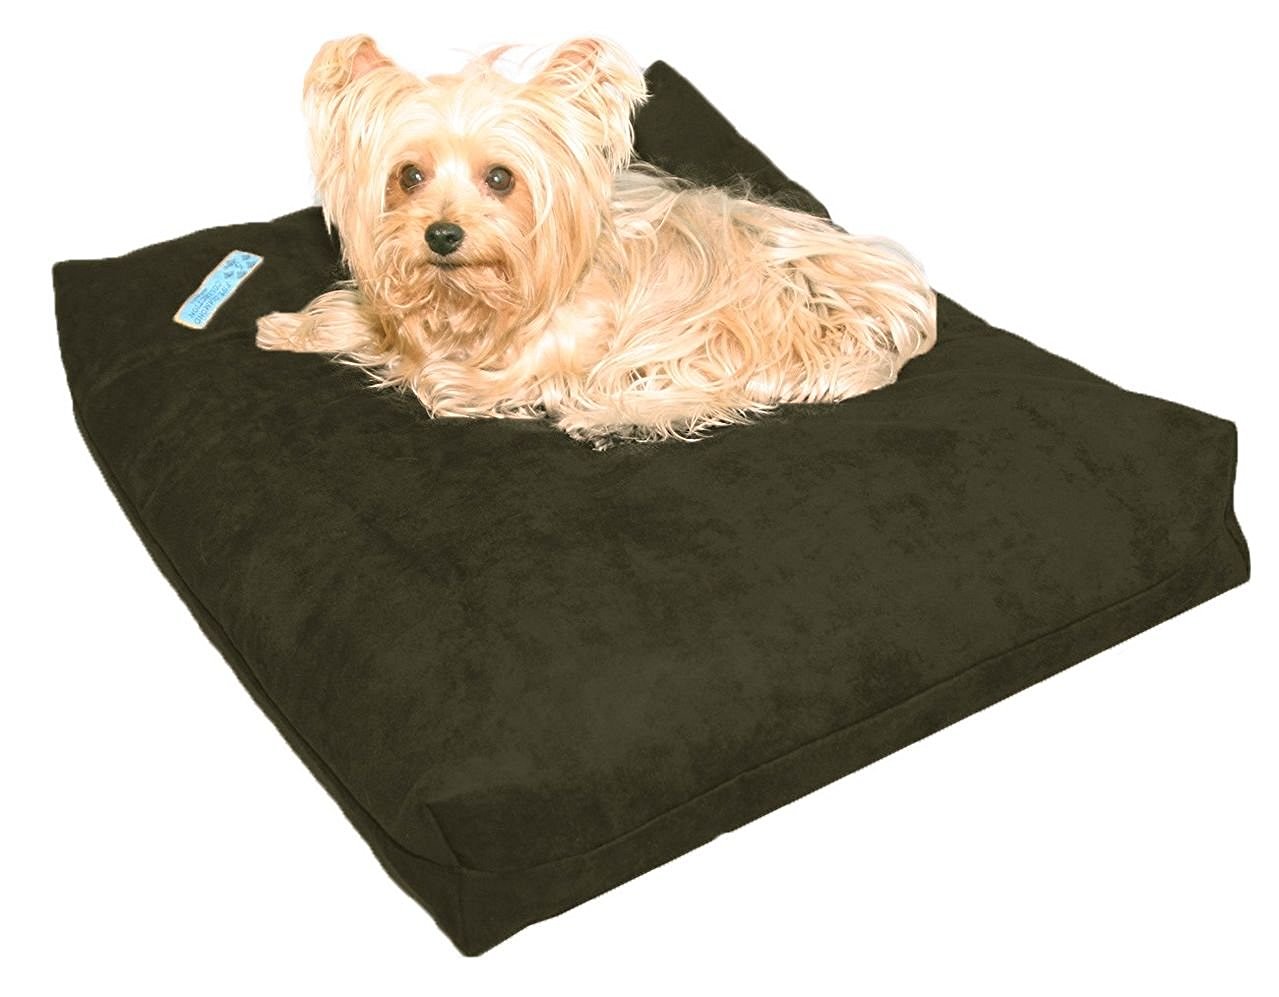 Five Diamond Collection Shredded Memory Foam Orthopedic Dog Bed, Made In USA (Olive,For Small Breed Dogs, 25" x 20")